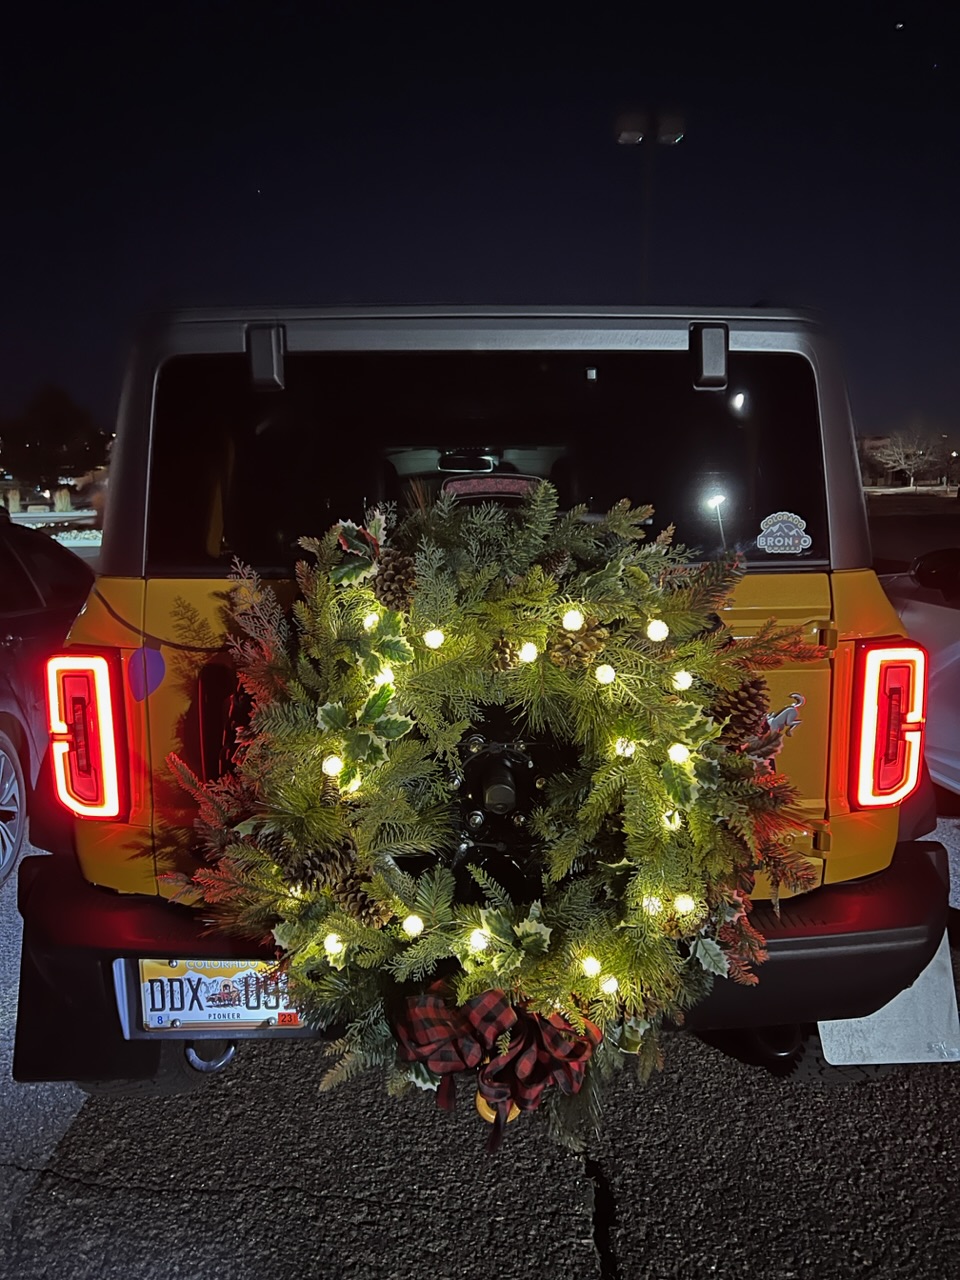 Ford Bronco How are you decorating your Bronco for Christmas or holidays? Post yours! 🎅 013C7799-8719-49B6-9E61-69A635CF7D40